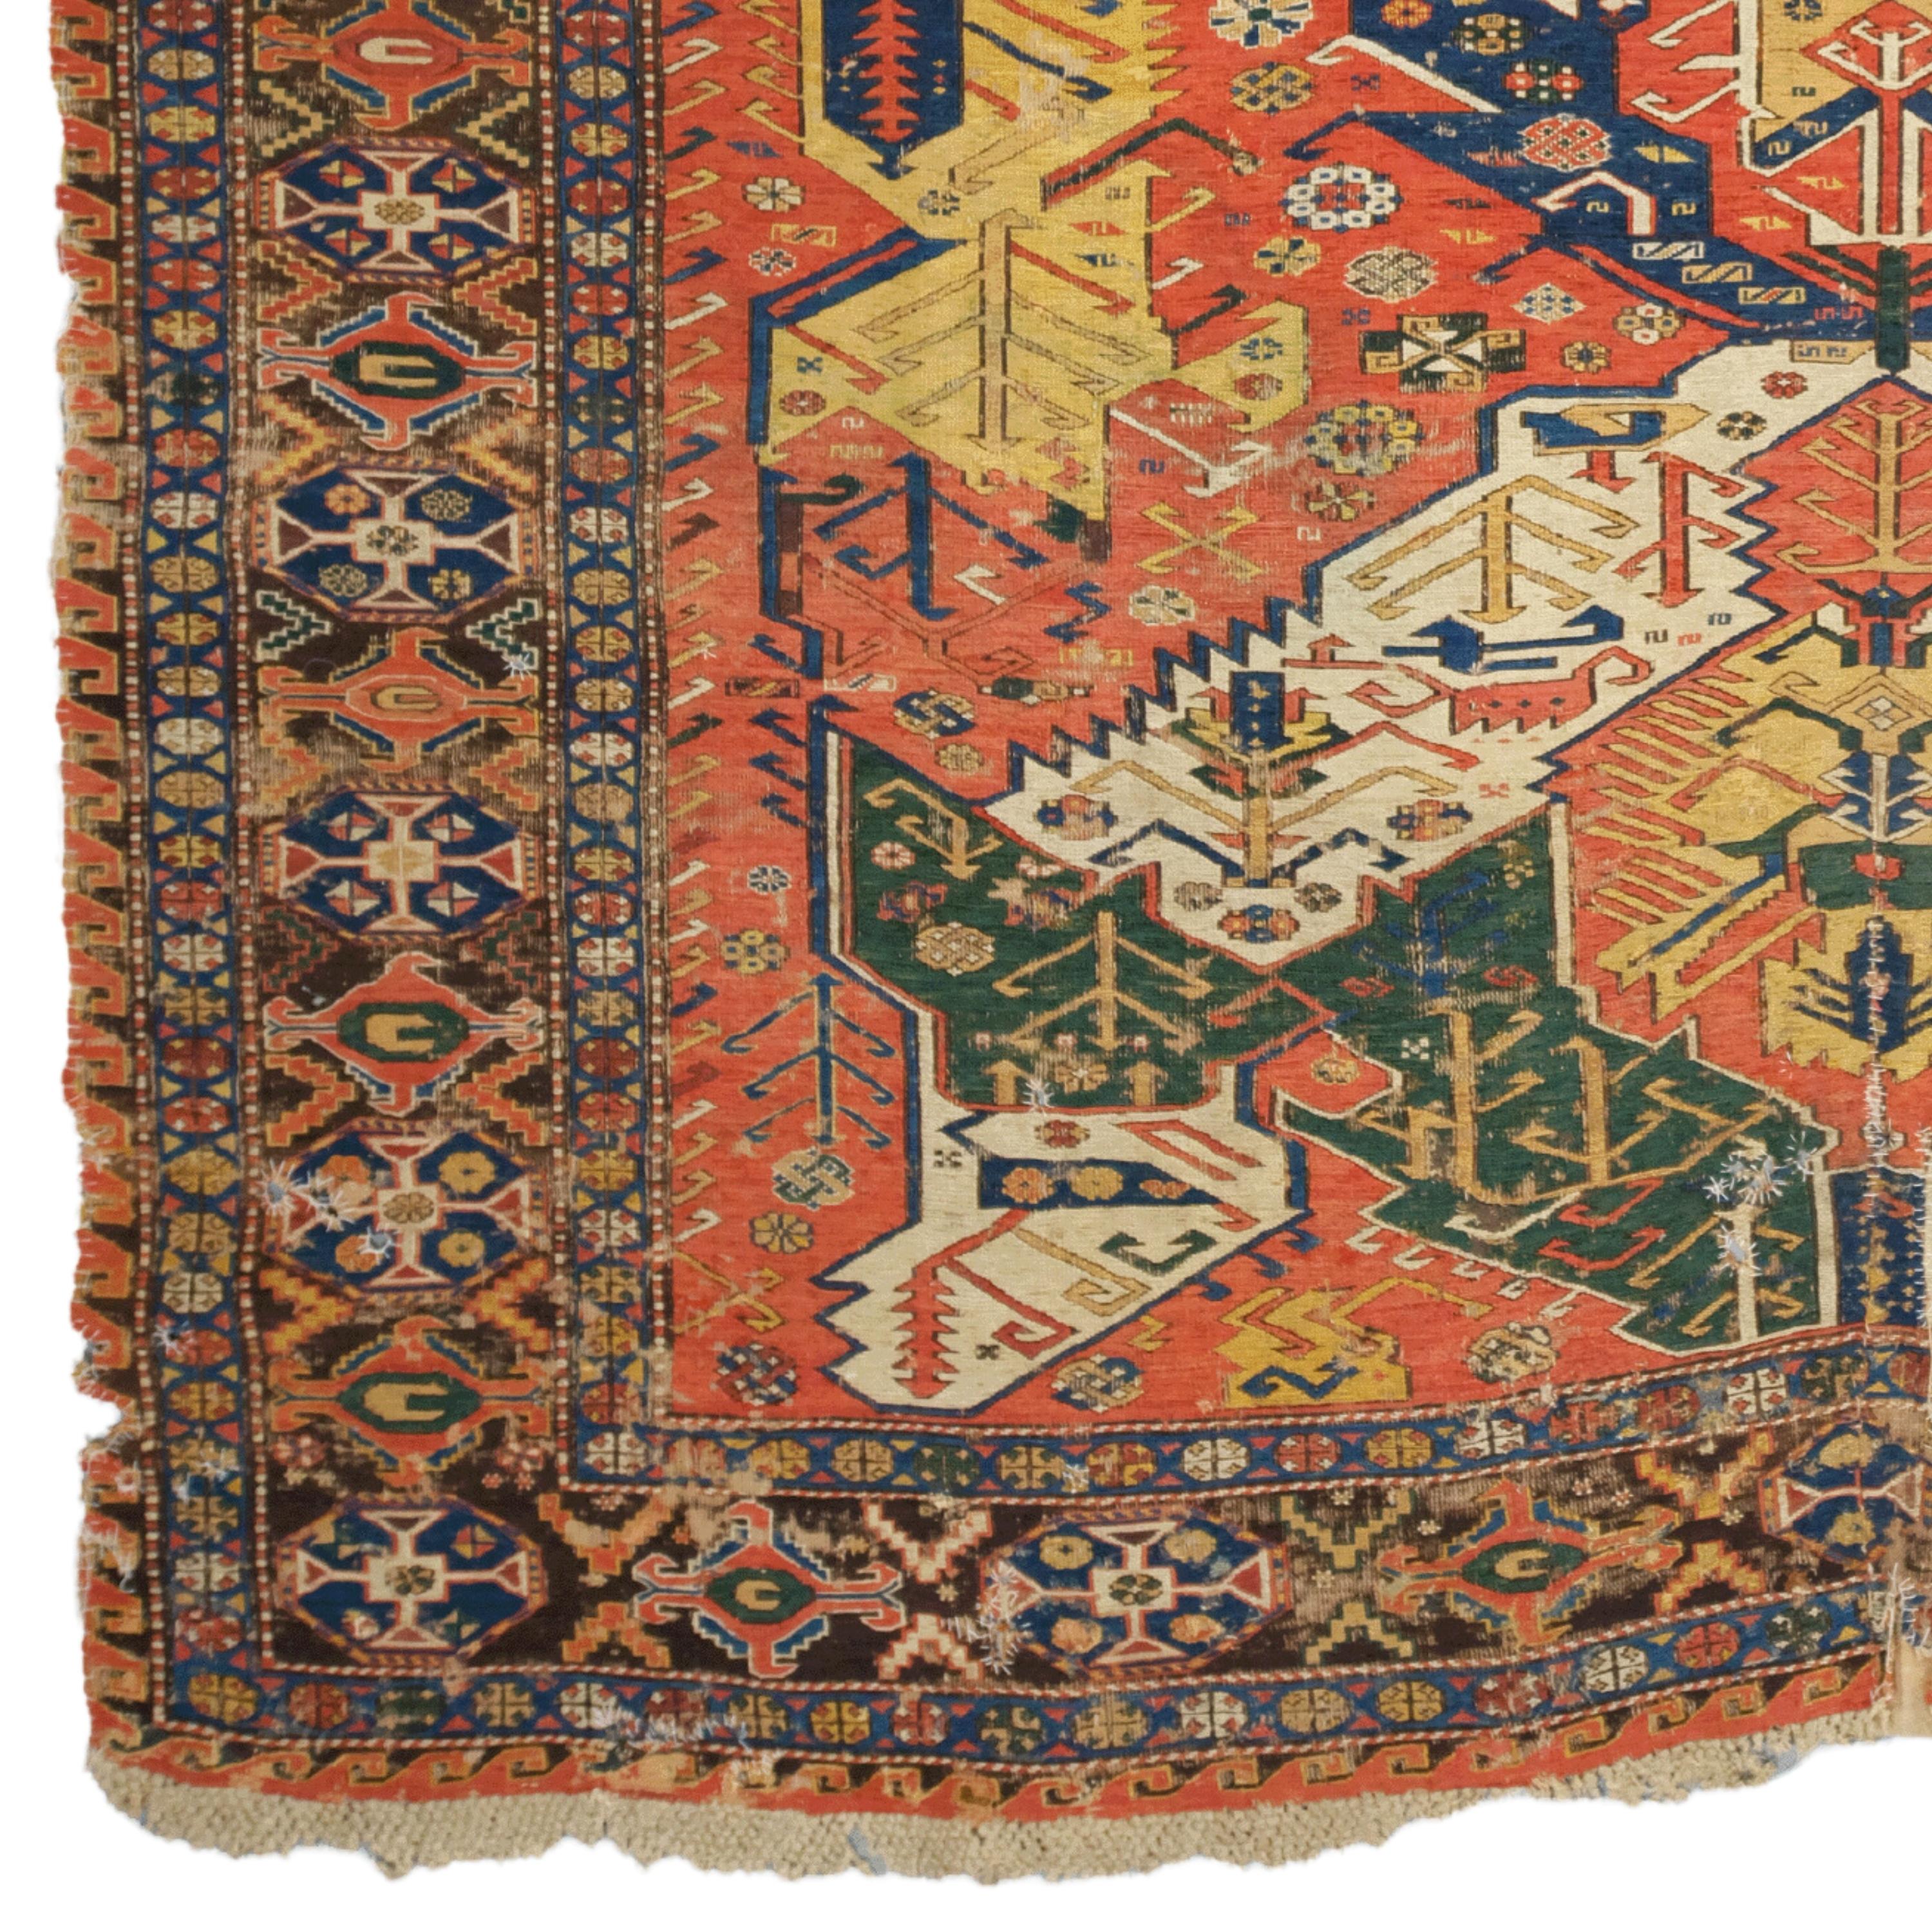 This impressive 19th century dragon sumac rug will add an authentic touch to your space with its historical texture and unique patterns. The rich color palette and detailed craftsmanship will increase the value of this antique piece and enrich the